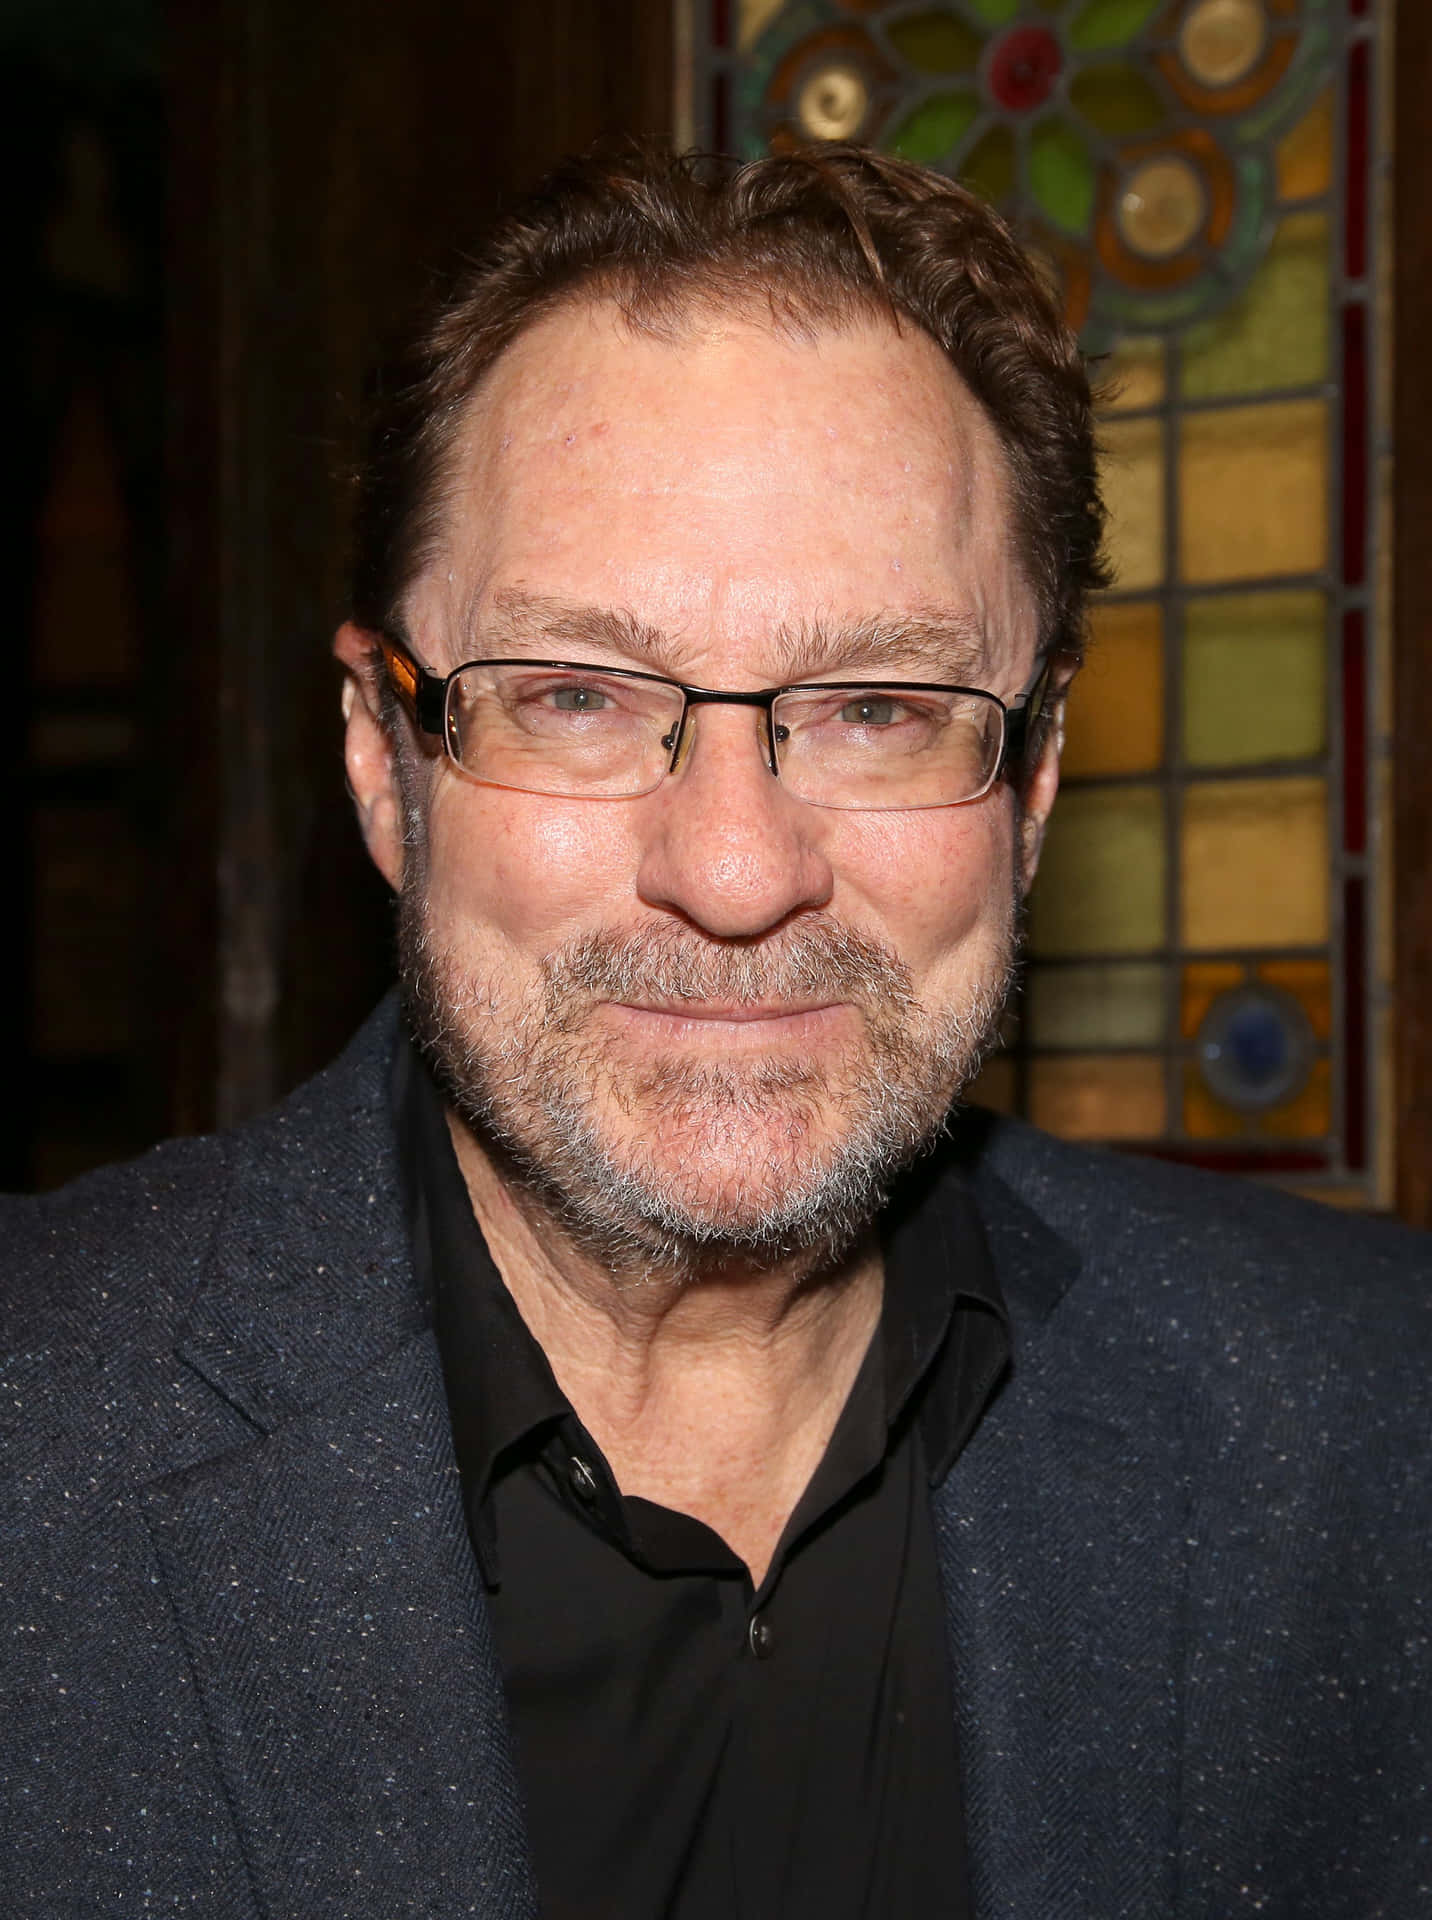 Award-winning actor Stephen Root - Staring into the distance Wallpaper